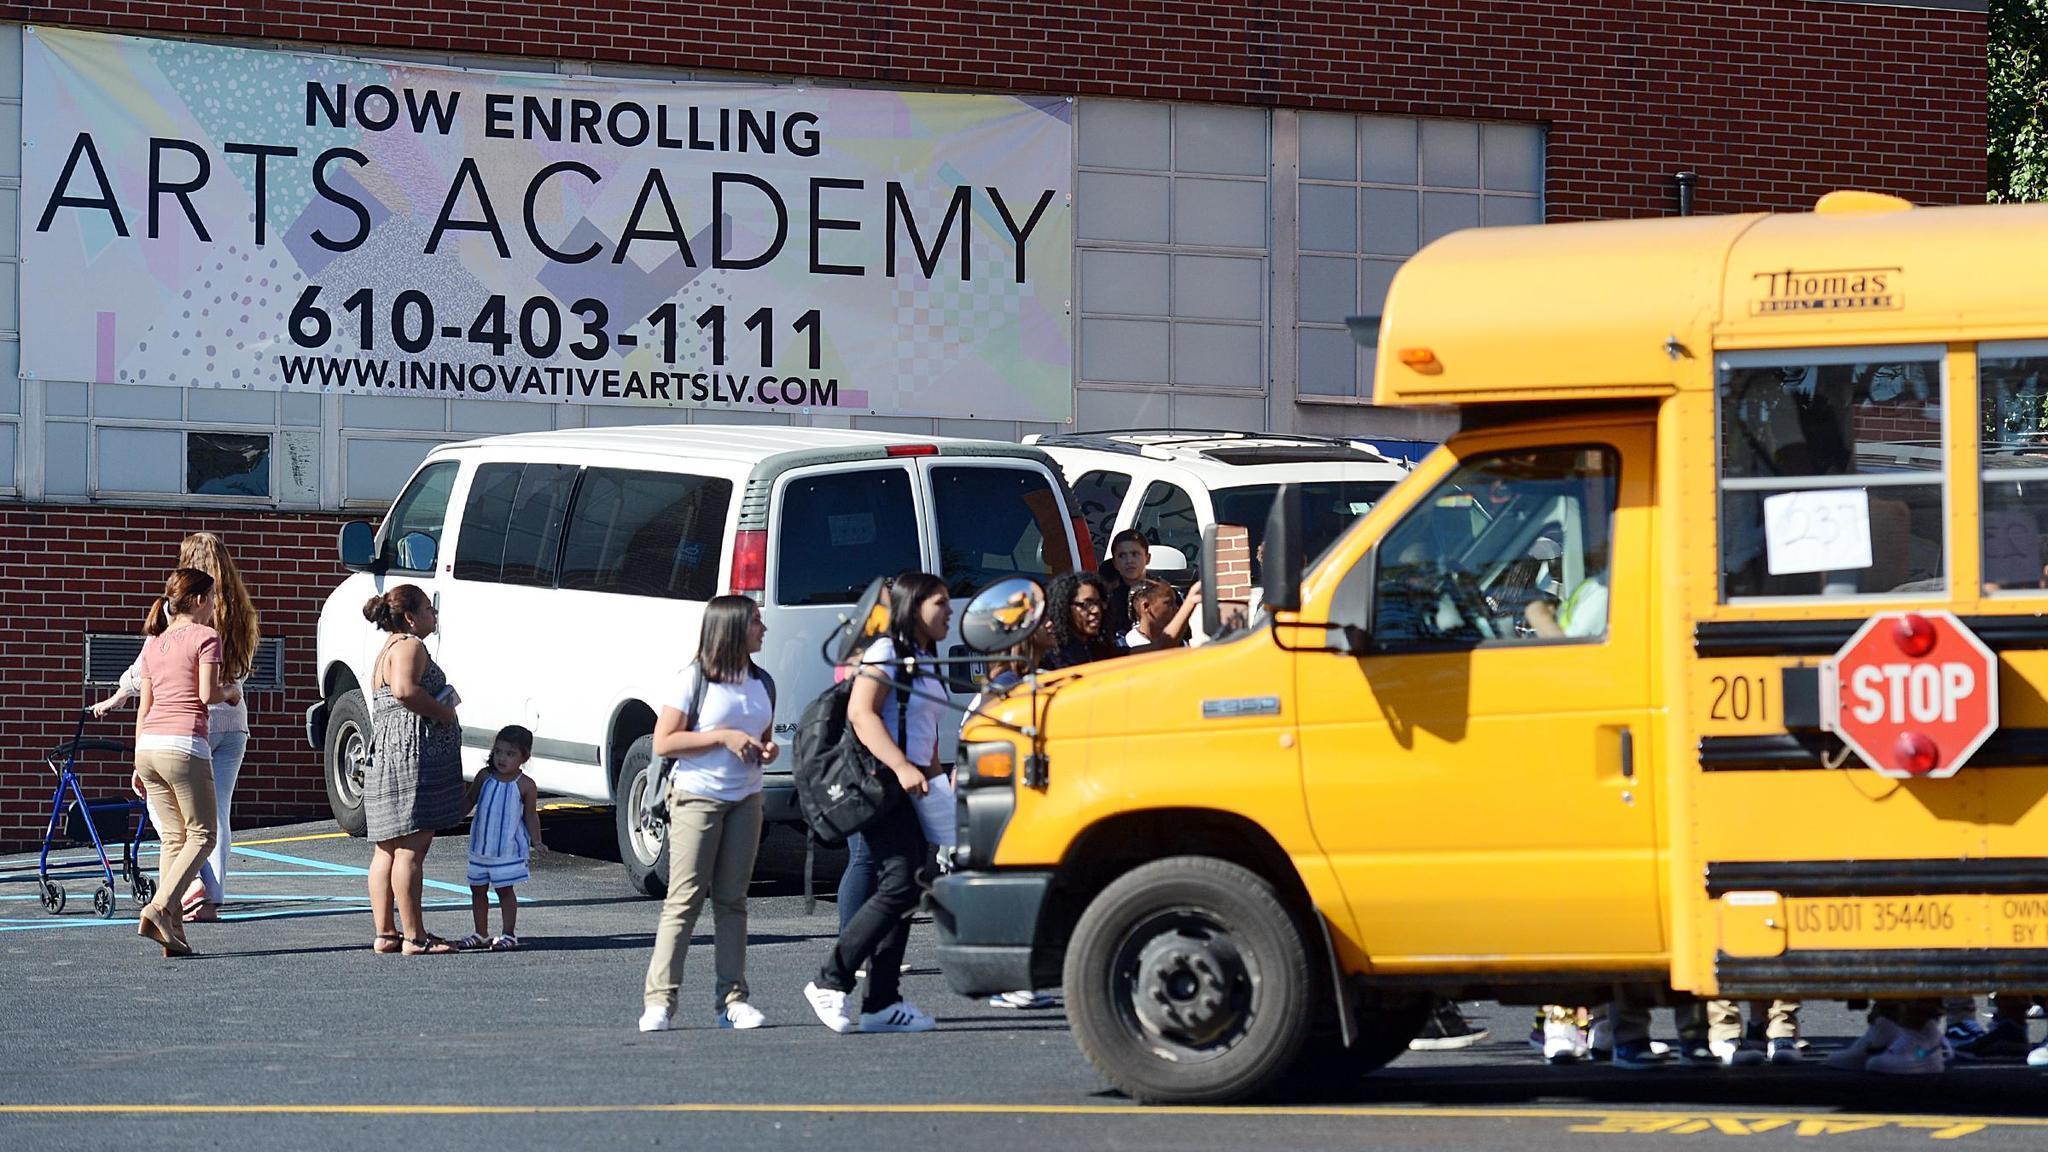 Innovative Arts Academy authorizes $30000 loan from landlord at unadvertised meeting - Allentown Morning Call